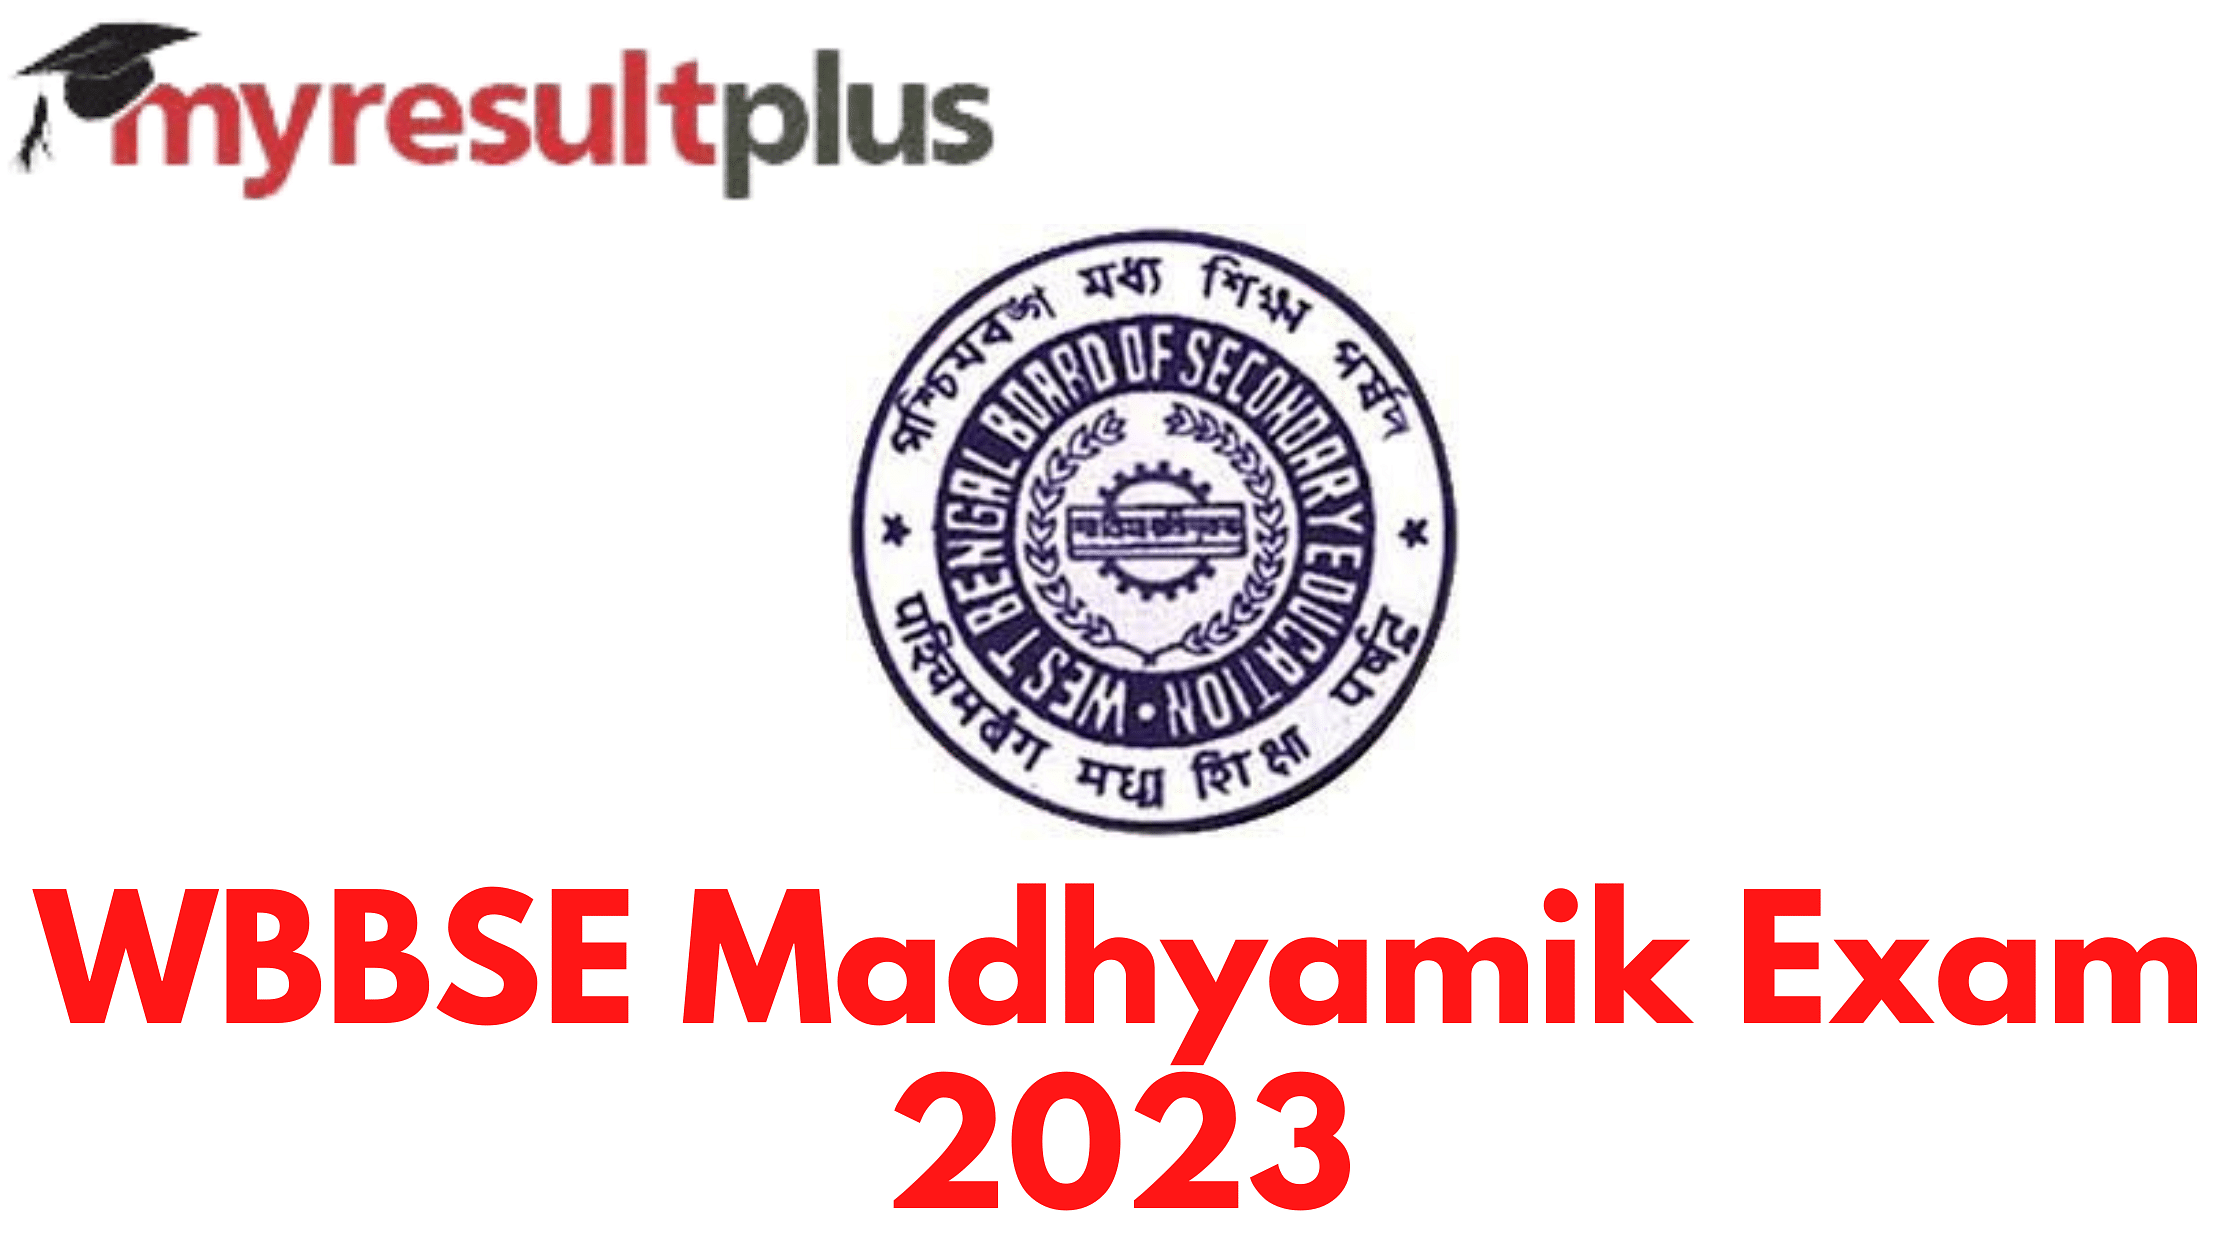 West Bengal Madhyamik Exam Date 2023 Announced, Check Complete Schedule Here